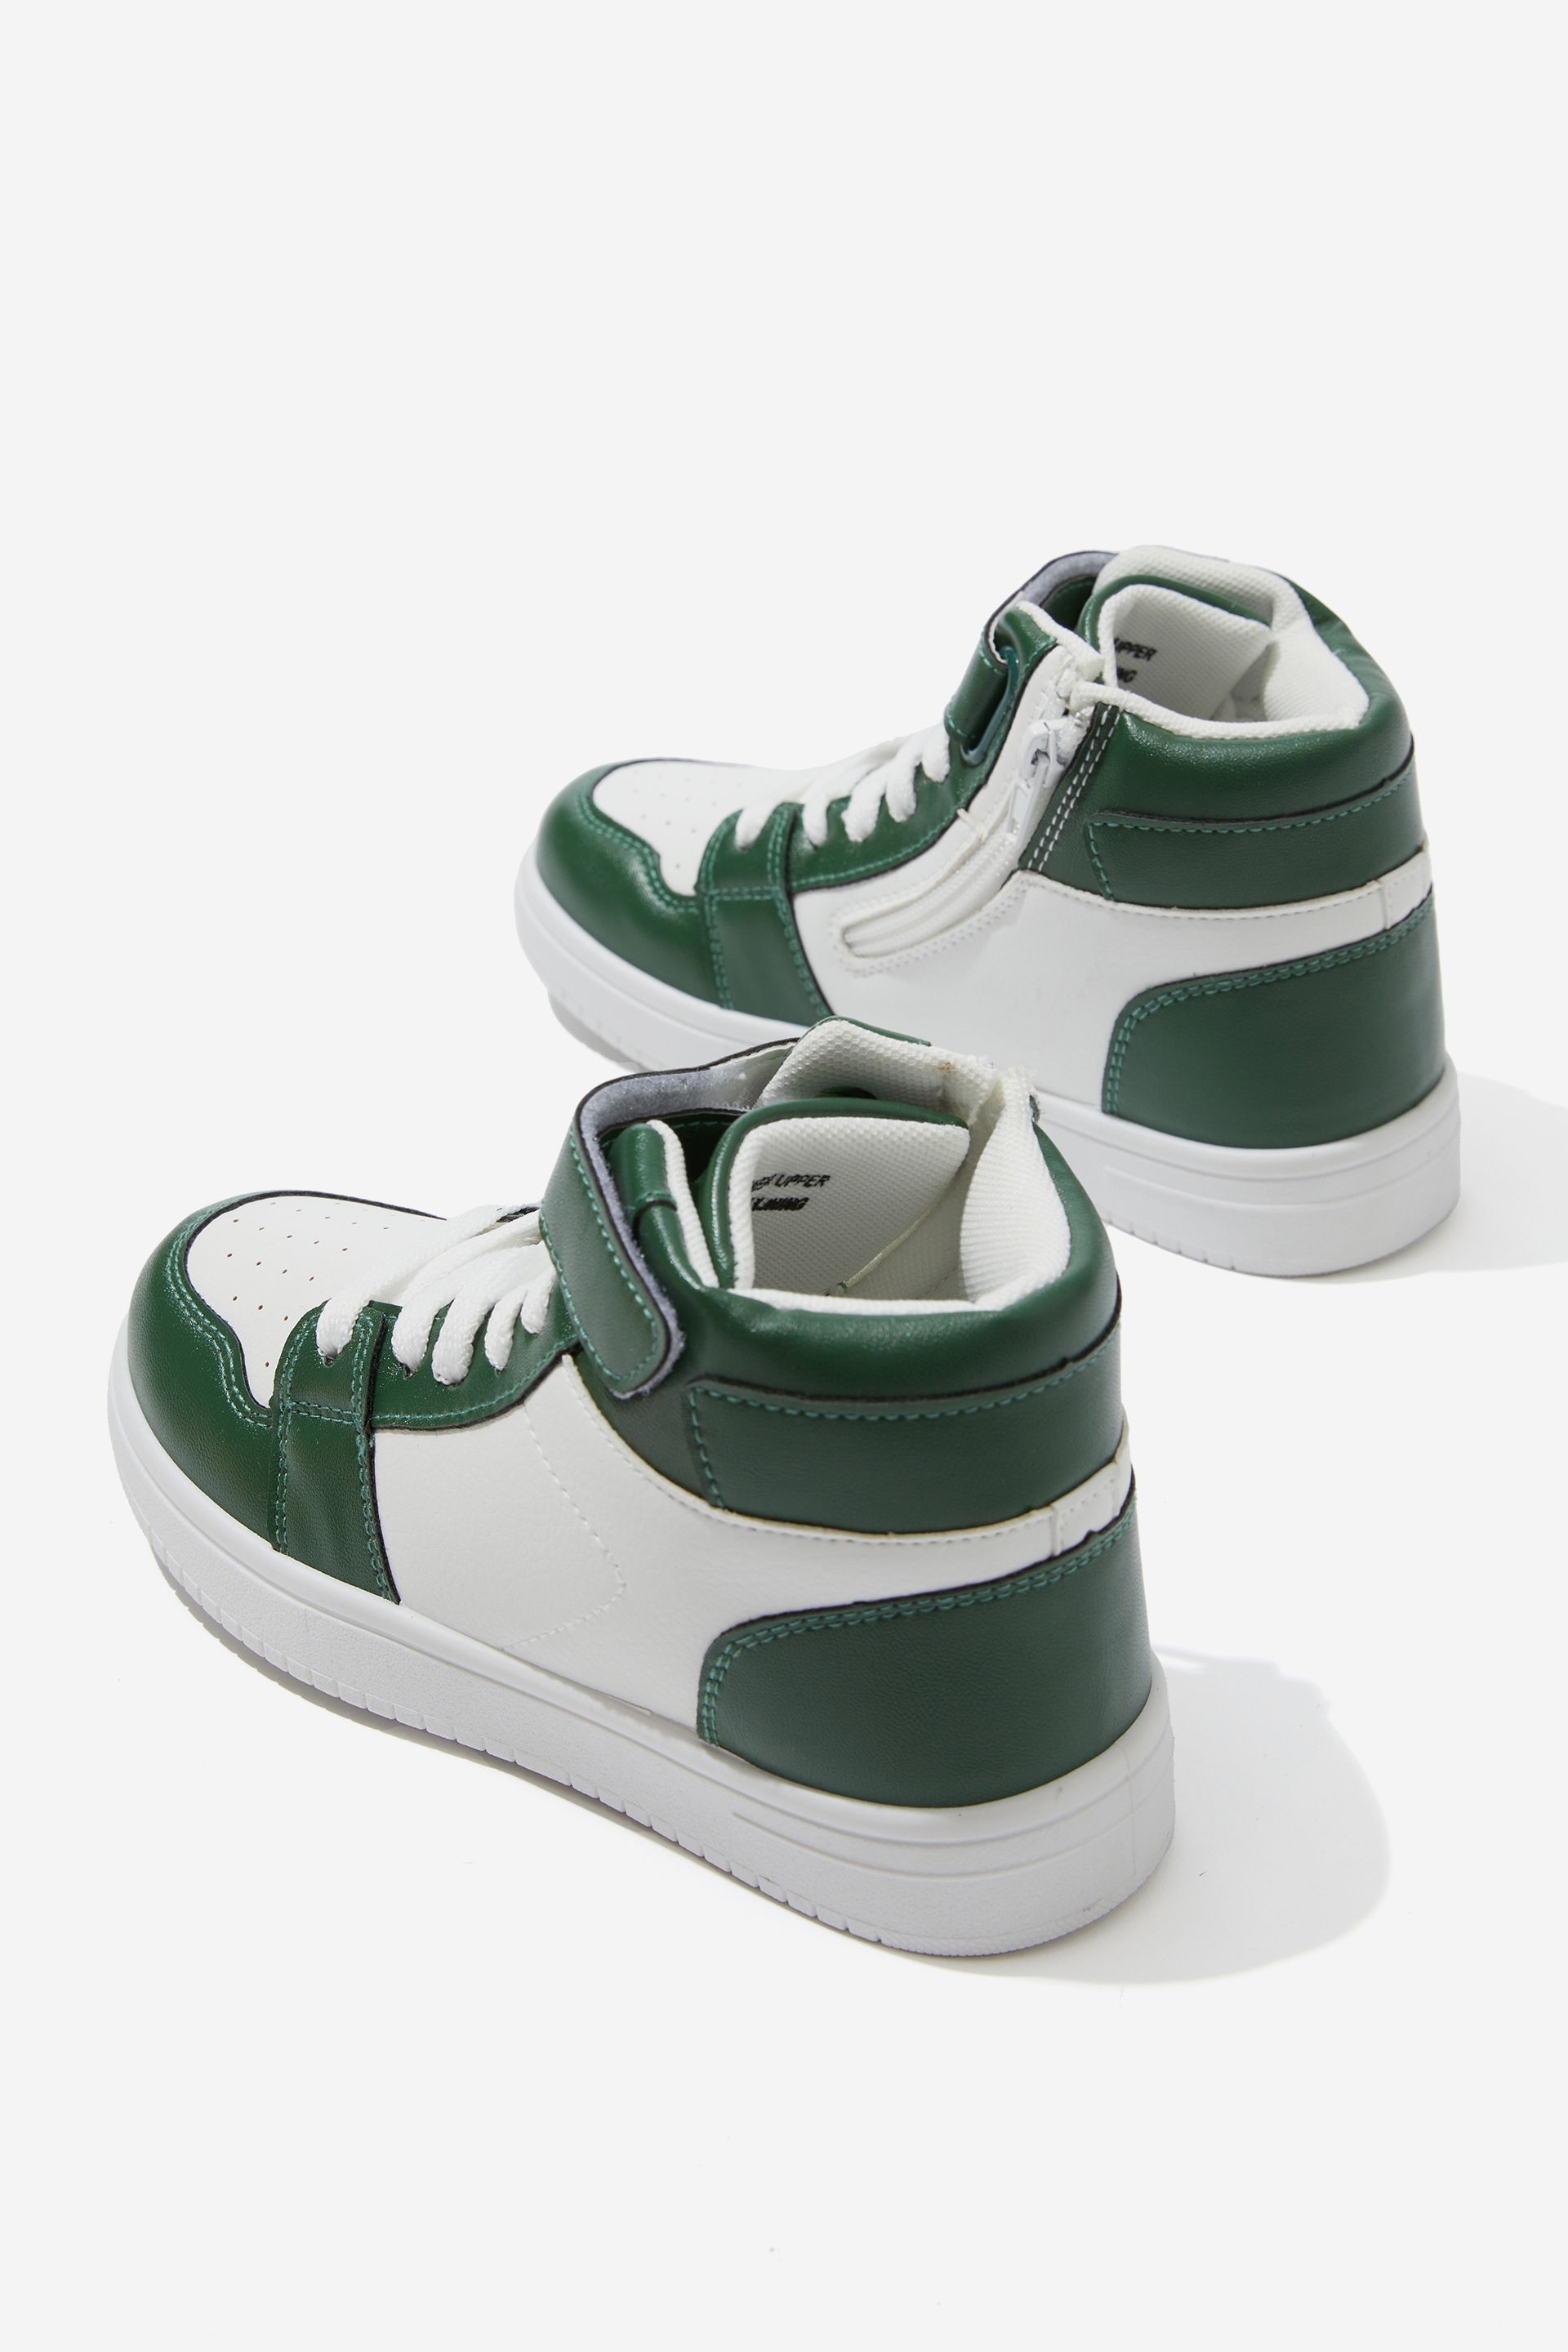 trainer green and white